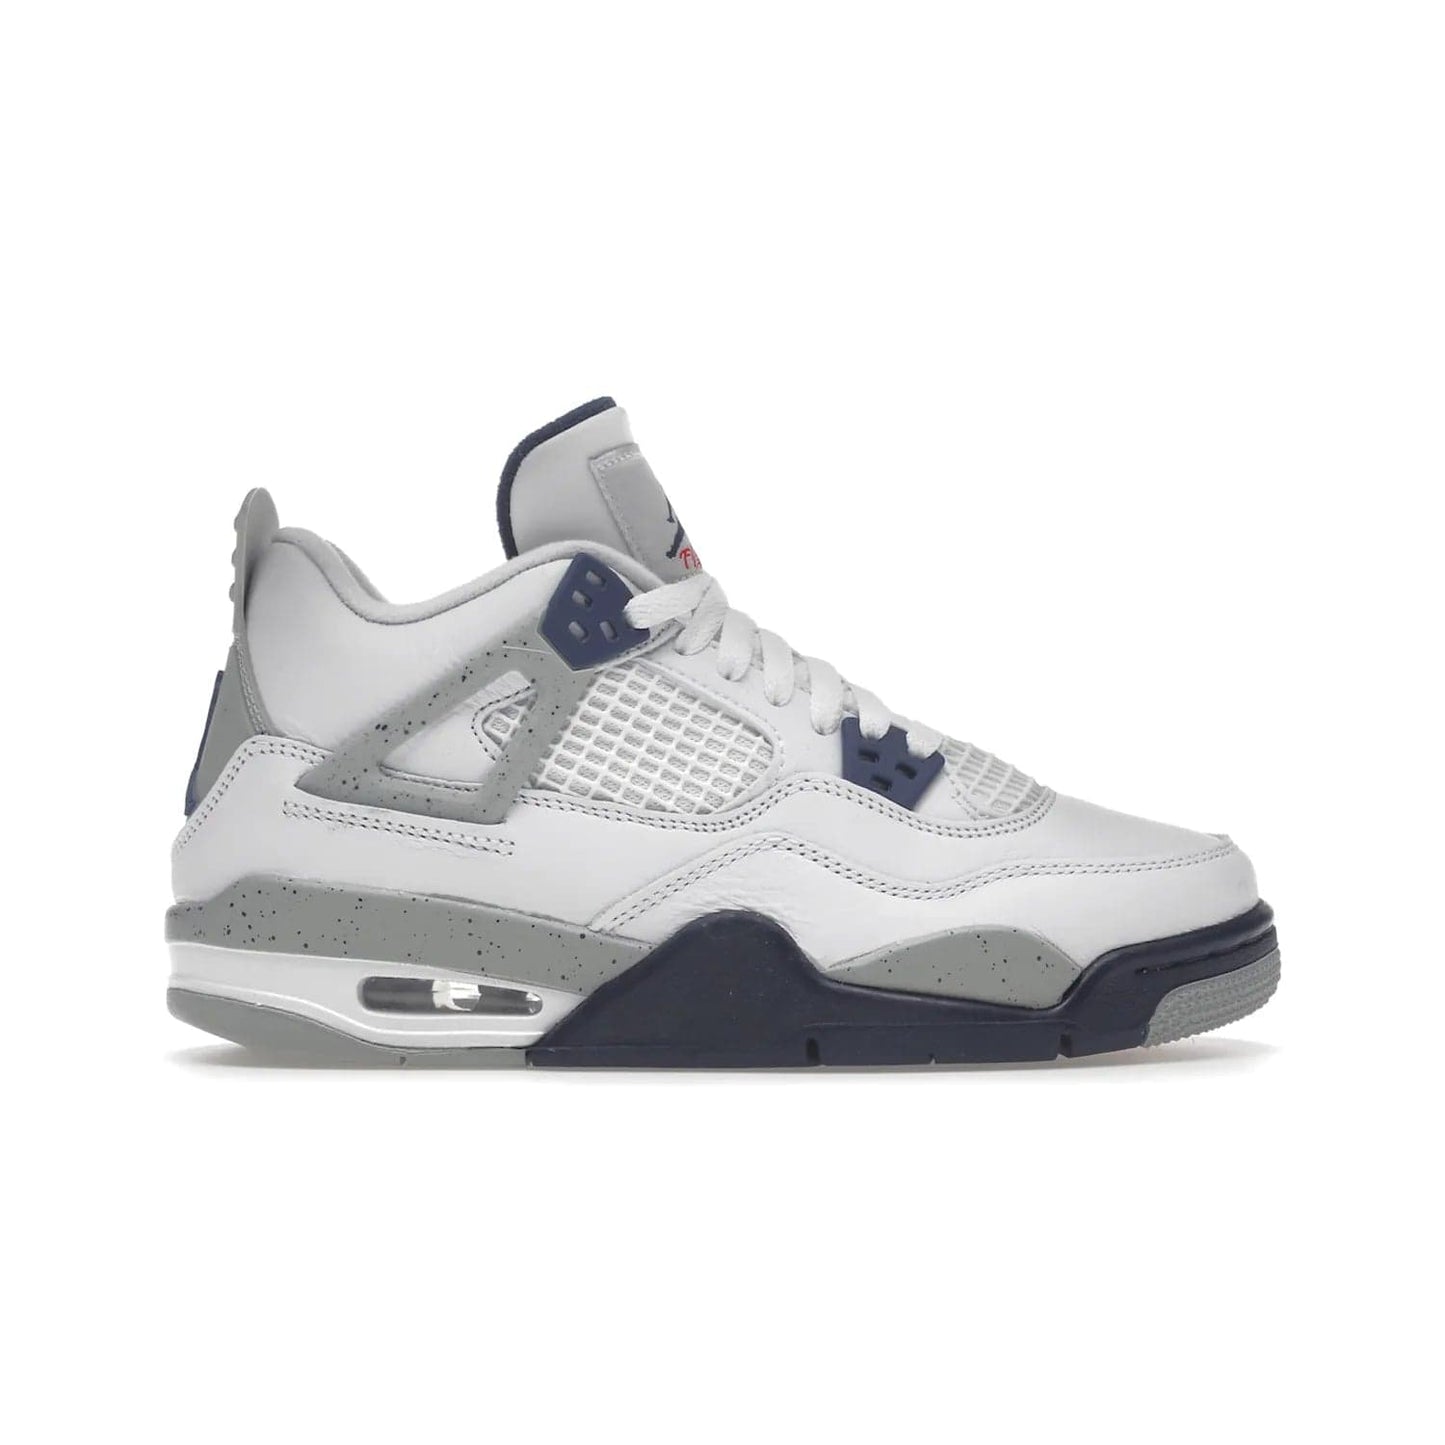 Jordan 4 Retro Midnight Navy (GS) - Image 1 - Only at www.BallersClubKickz.com - Shop the Air Jordan 4 Retro Midnight Navy GS. The white leather upper features black support wings & heel tab, navy eyelets & woven tongue tag with Jumpman logos. The midsole features two-tone polyurethane insole & AIR units in the heel & forefoot. Get the white/midnight navy/light smoke grey/fire colorway & show off your style.